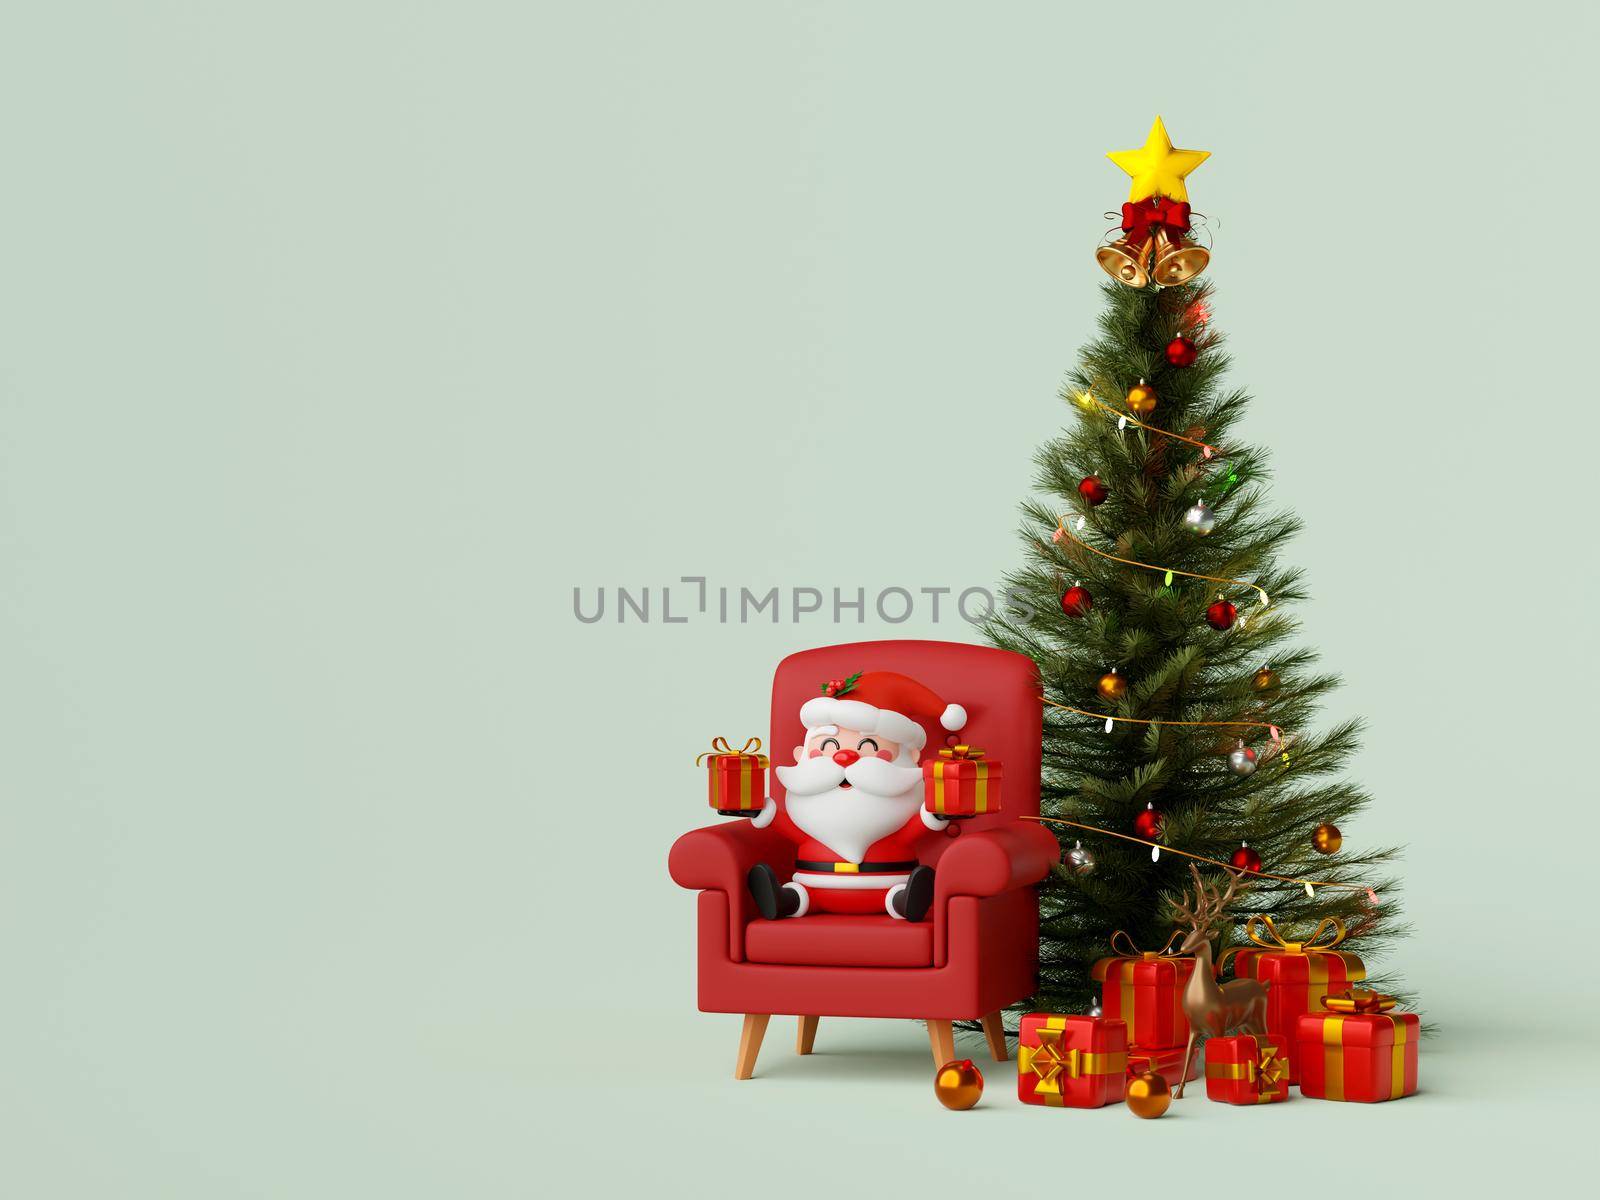 Christmas banner of Santa Claus with Christmas tree and gift, 3d illustration by nutzchotwarut